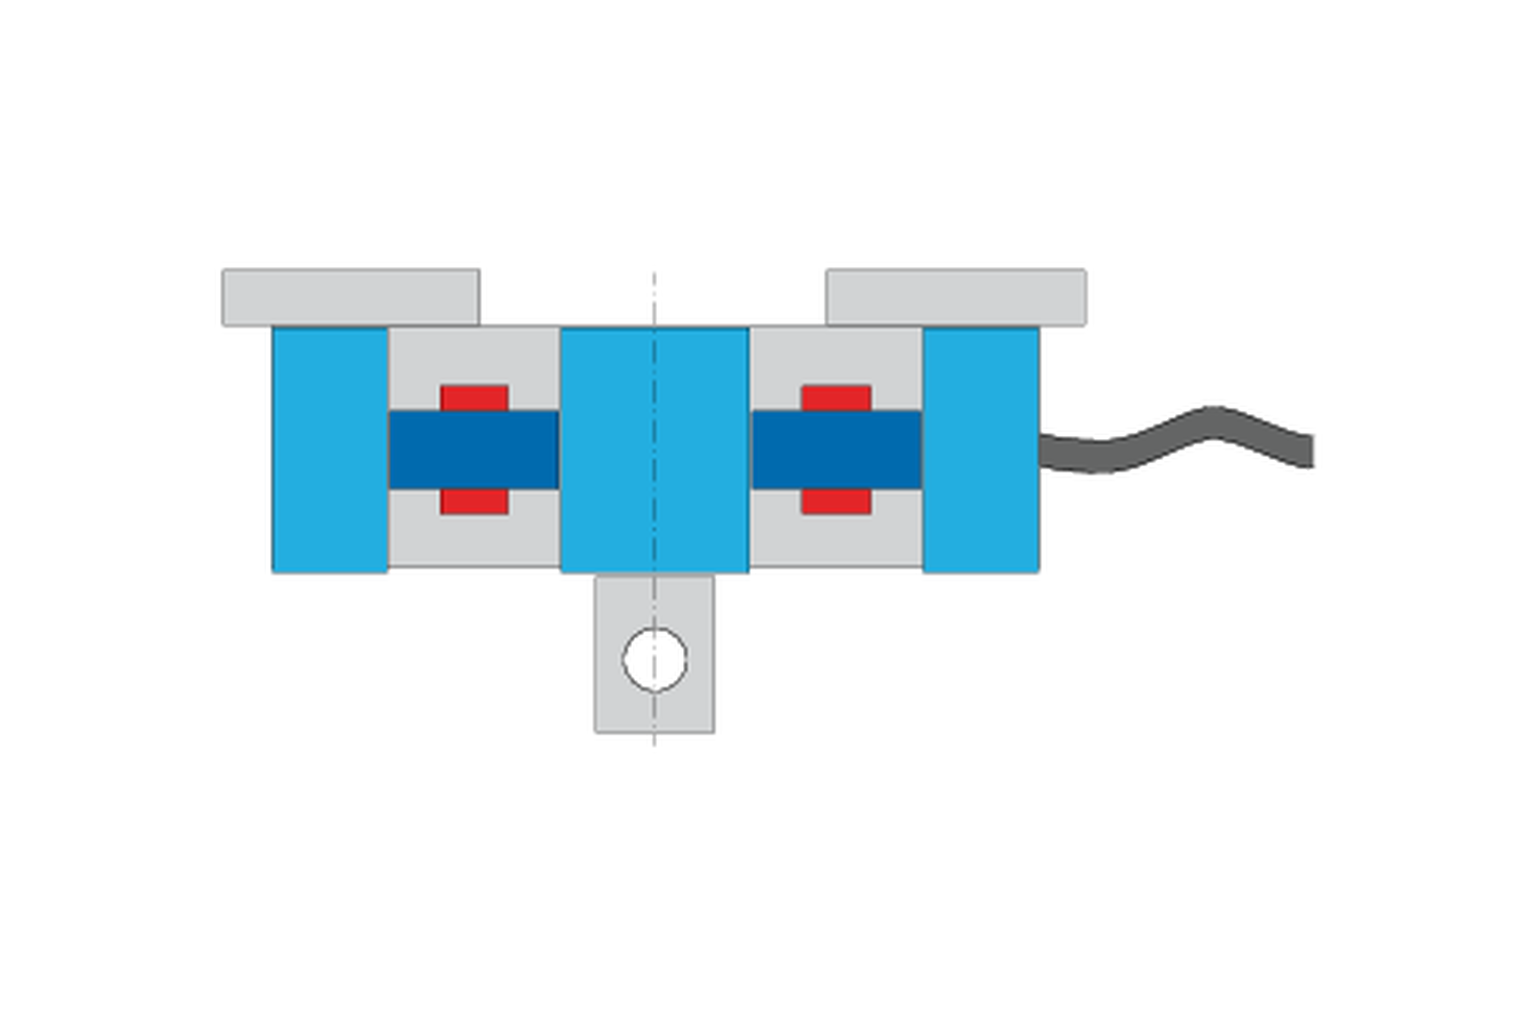 How does a load cell work? Illustration of load cell with strain gauge without load